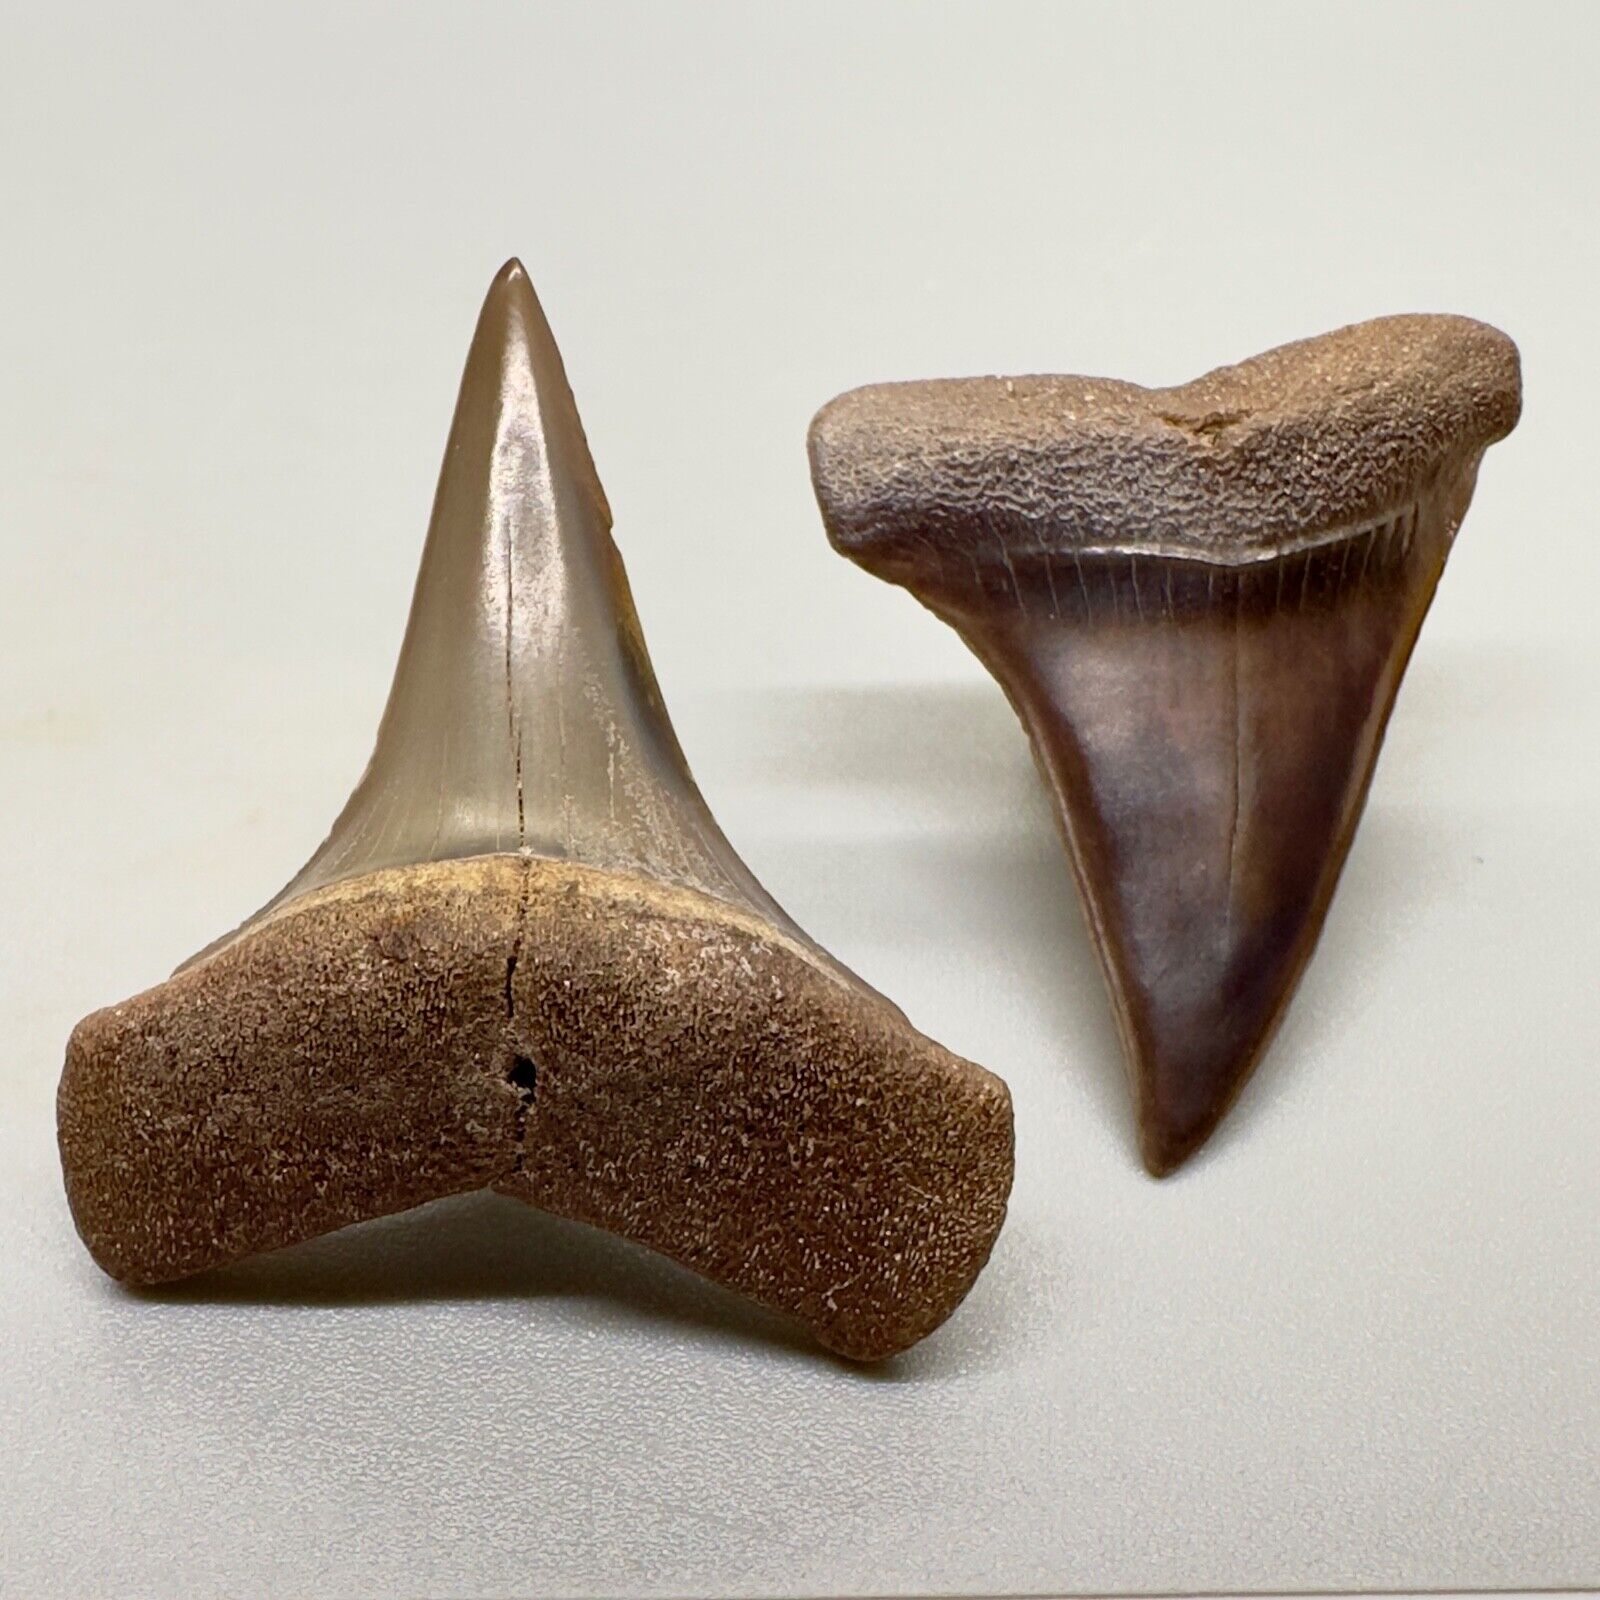 Pair of GORGEOUS and colorful Fossil EXTINCT MAKO Shark Teeth - Peru